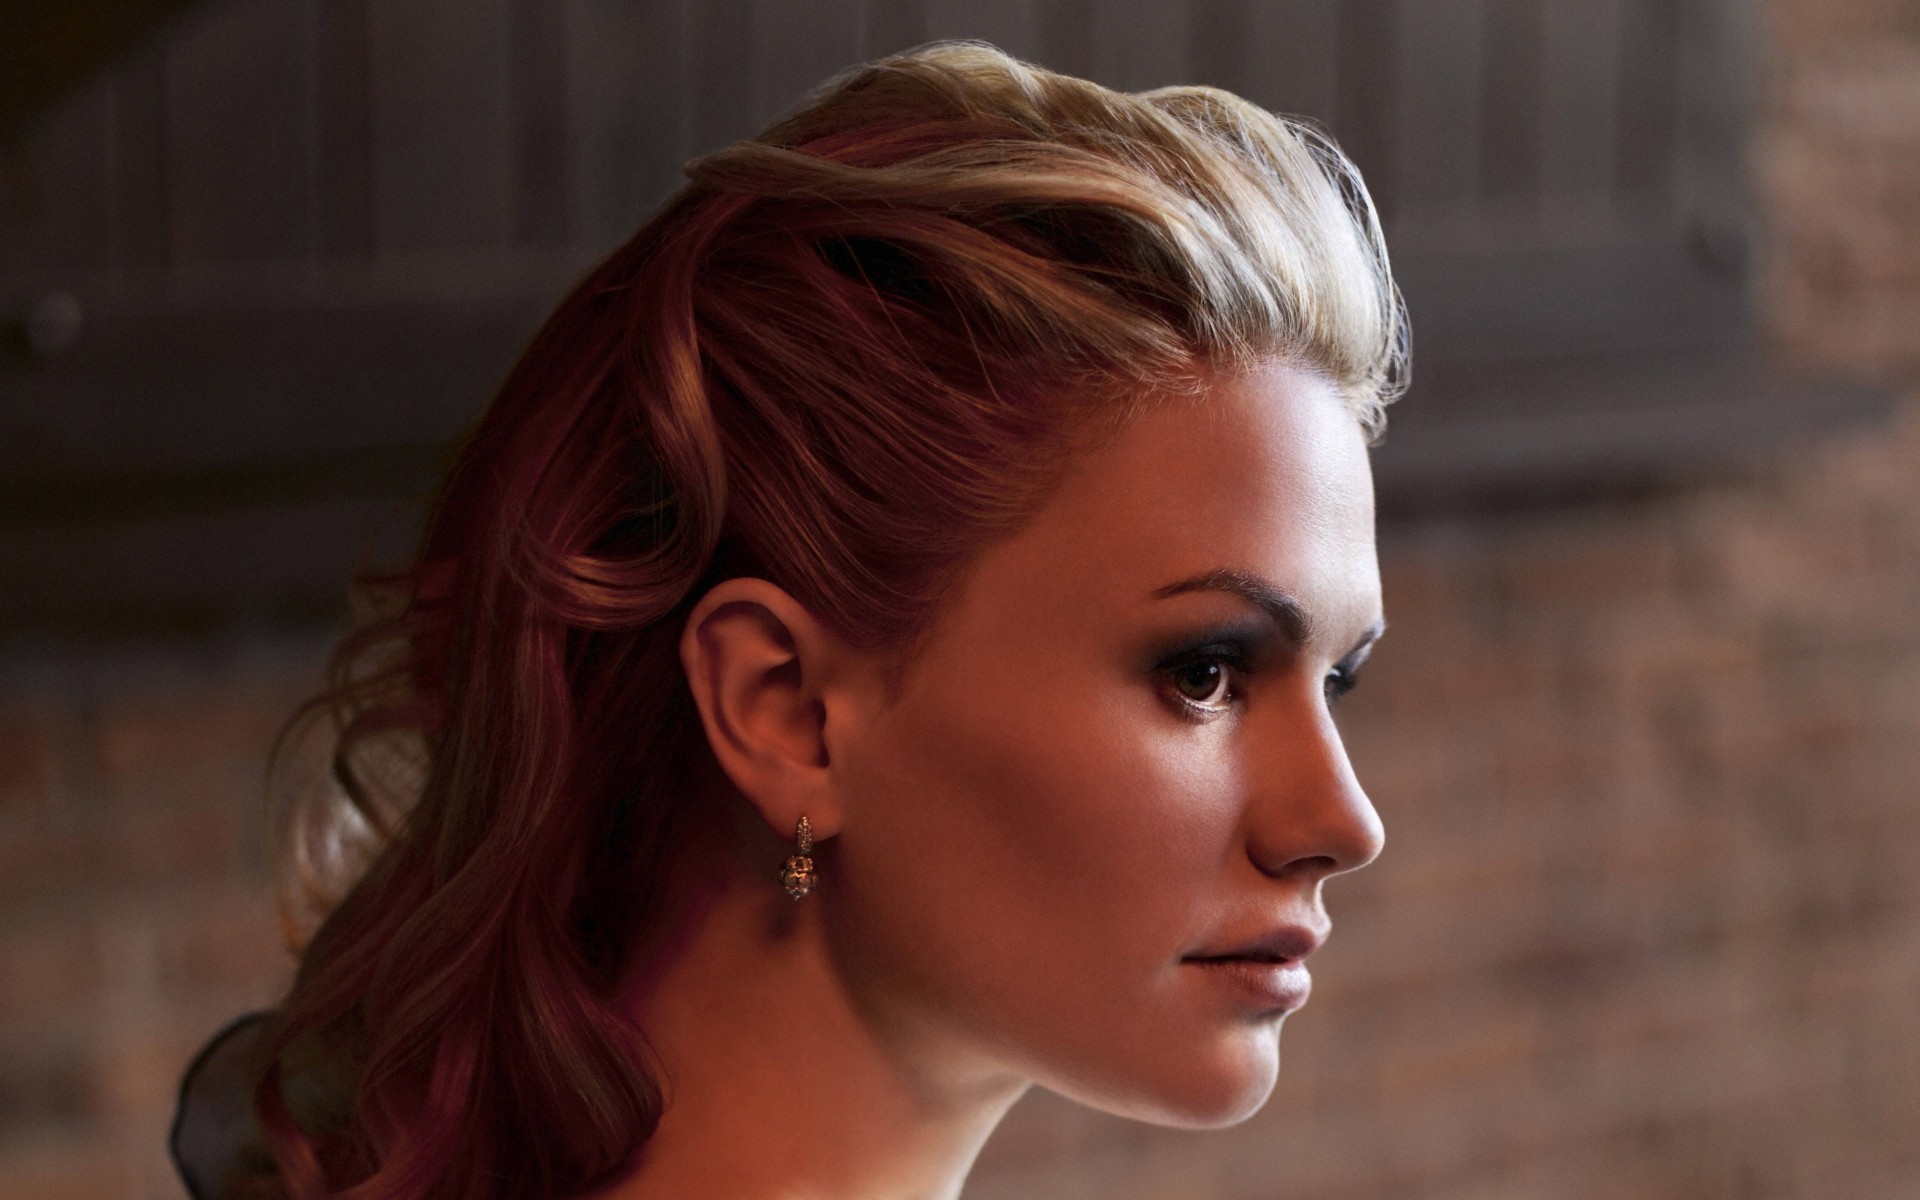 Anna Paquin X Men Days Of Future Past Blonde Actress Brown Eyes Profile Women 1920x1200